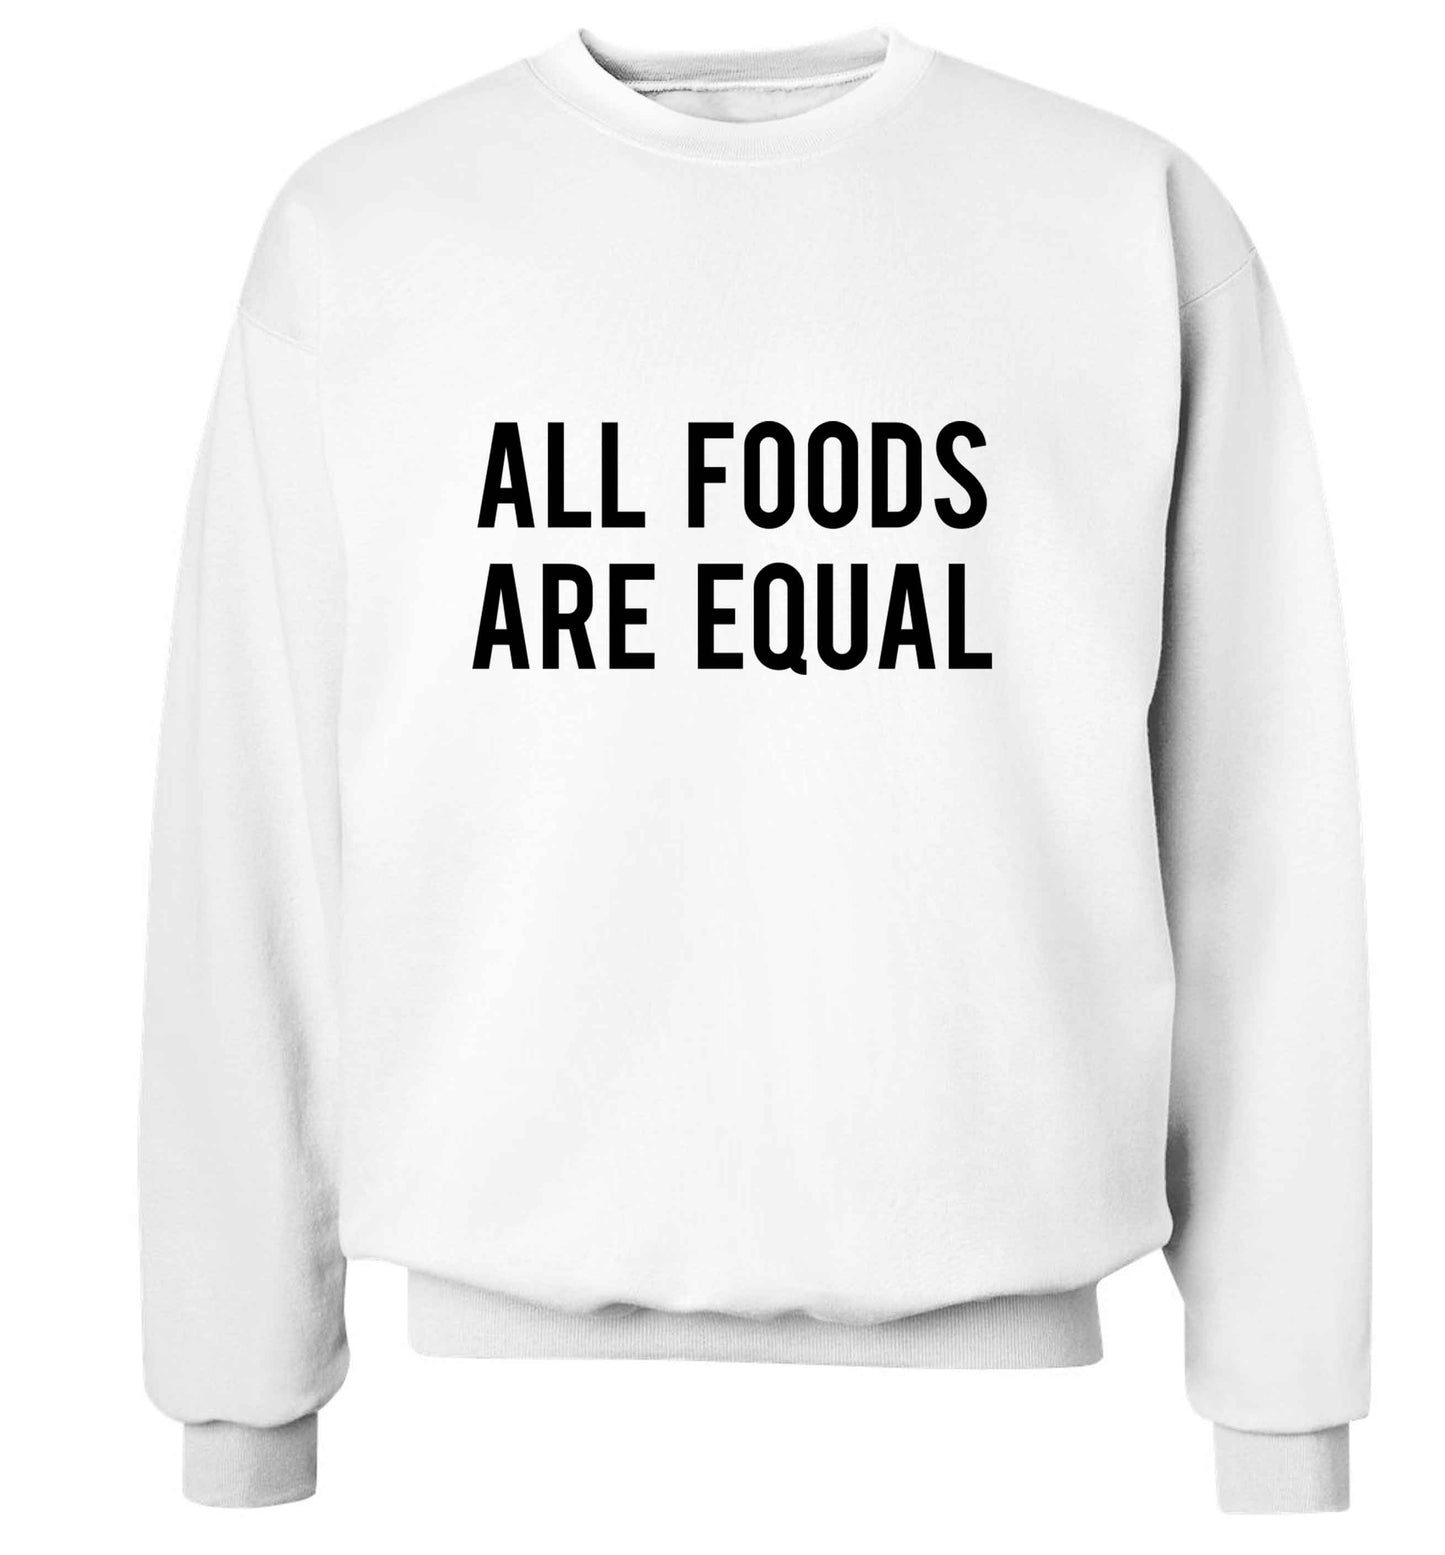 All foods are equal adult's unisex white sweater 2XL